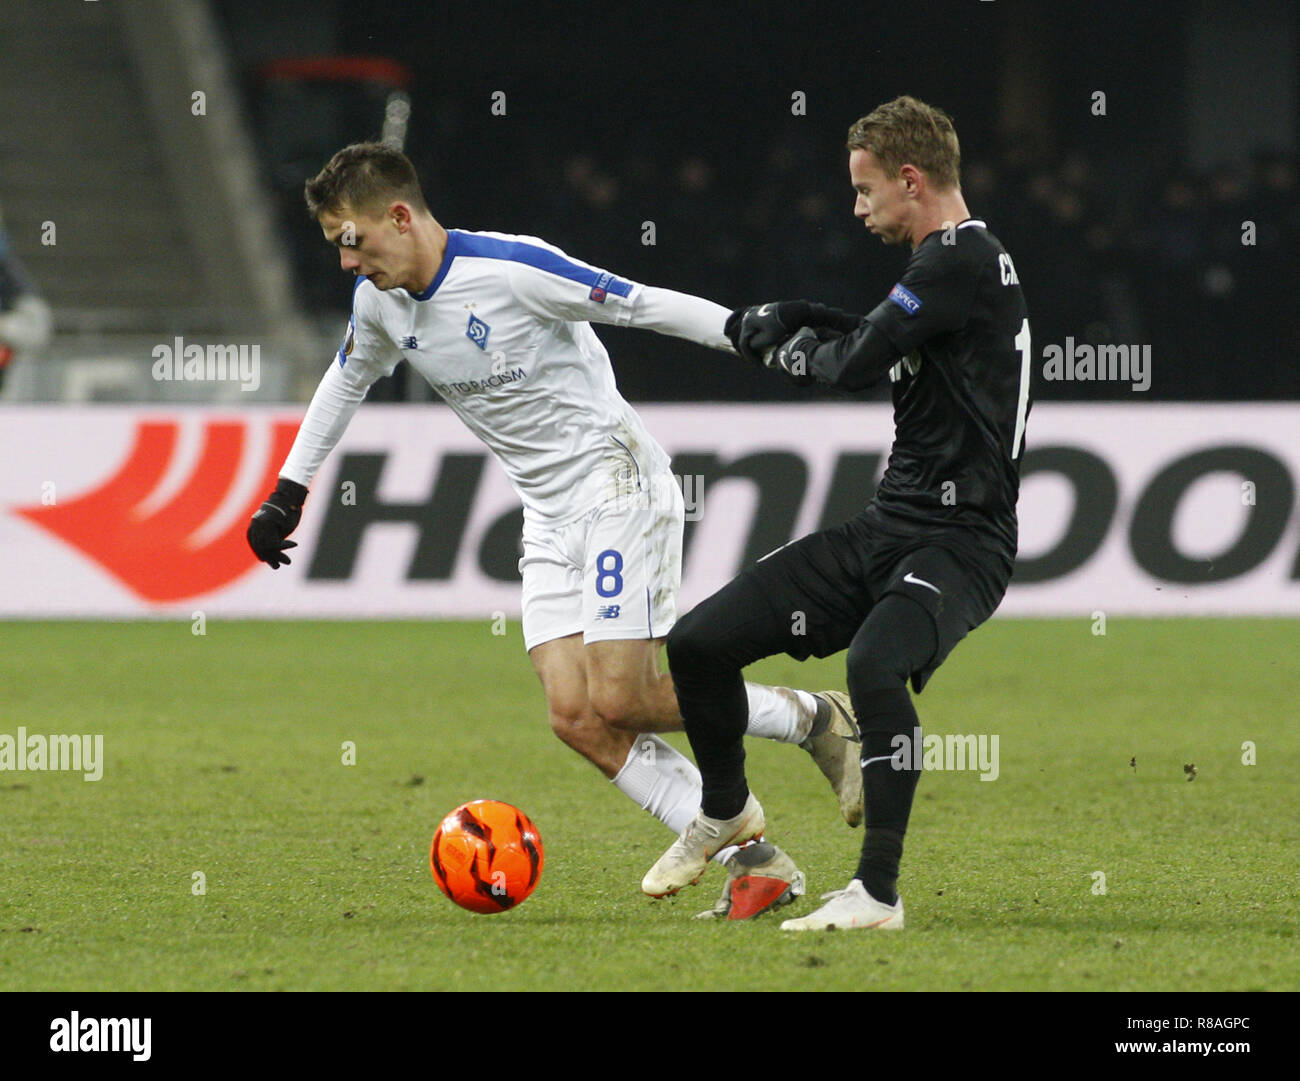 Kiev, Ukraine. 13th Dec, 2018. Volodymyr Shepeliev ( L) of Dynamo and Jan Chramosta (R ) of Jablonec are seen in action during the UEFA Europa League Group K soccer match between FC Dynamo Kiev and FK Jablonec at the NSK Olimpiyskiy in Kiev. Credit: Vadim Kot/SOPA Images/ZUMA Wire/Alamy Live News Stock Photo